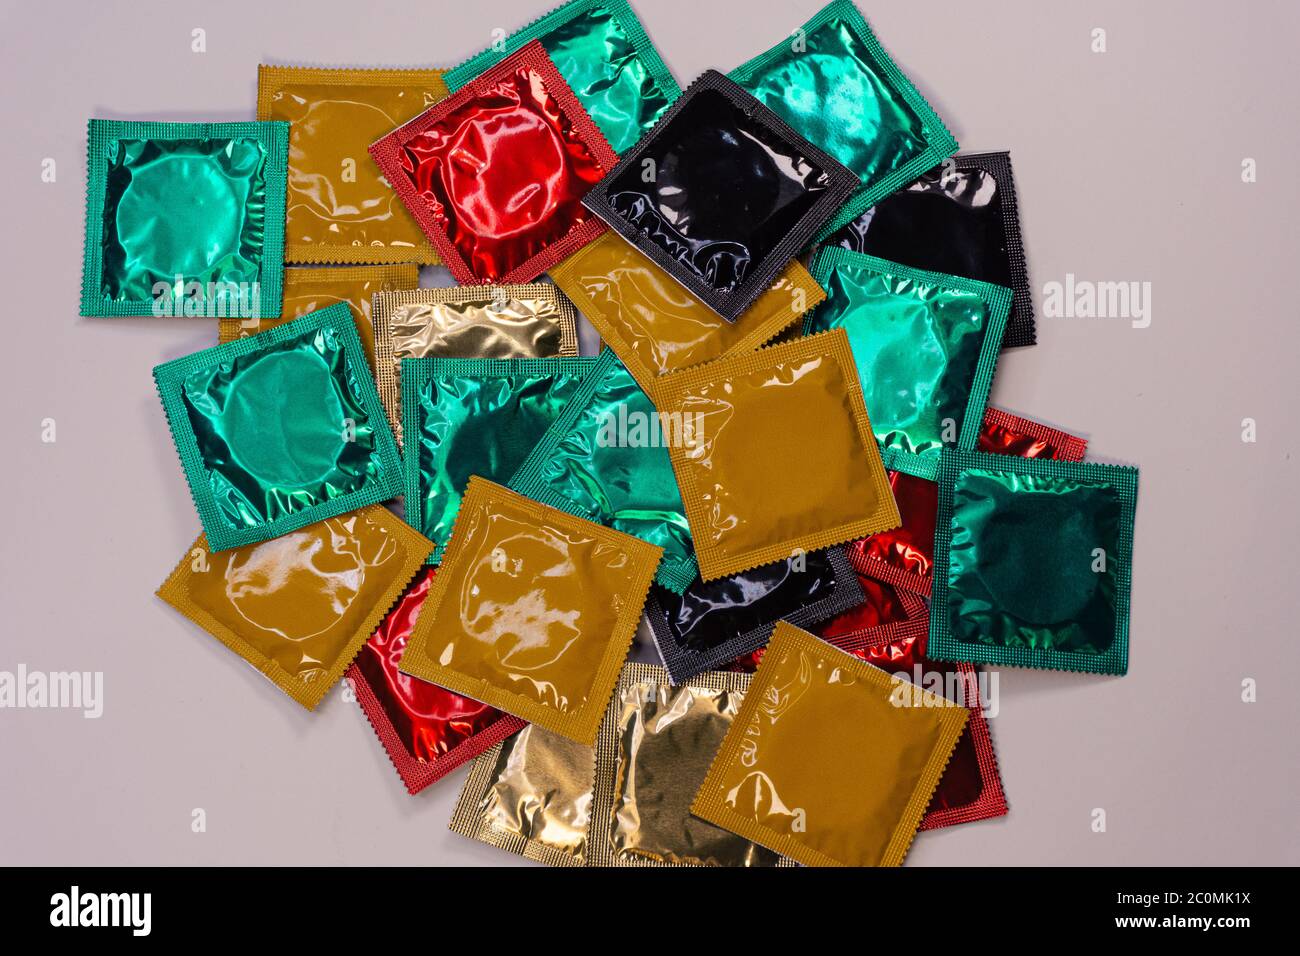 Display of colored condoms on a rotating platform arranged in bulk Stock Photo